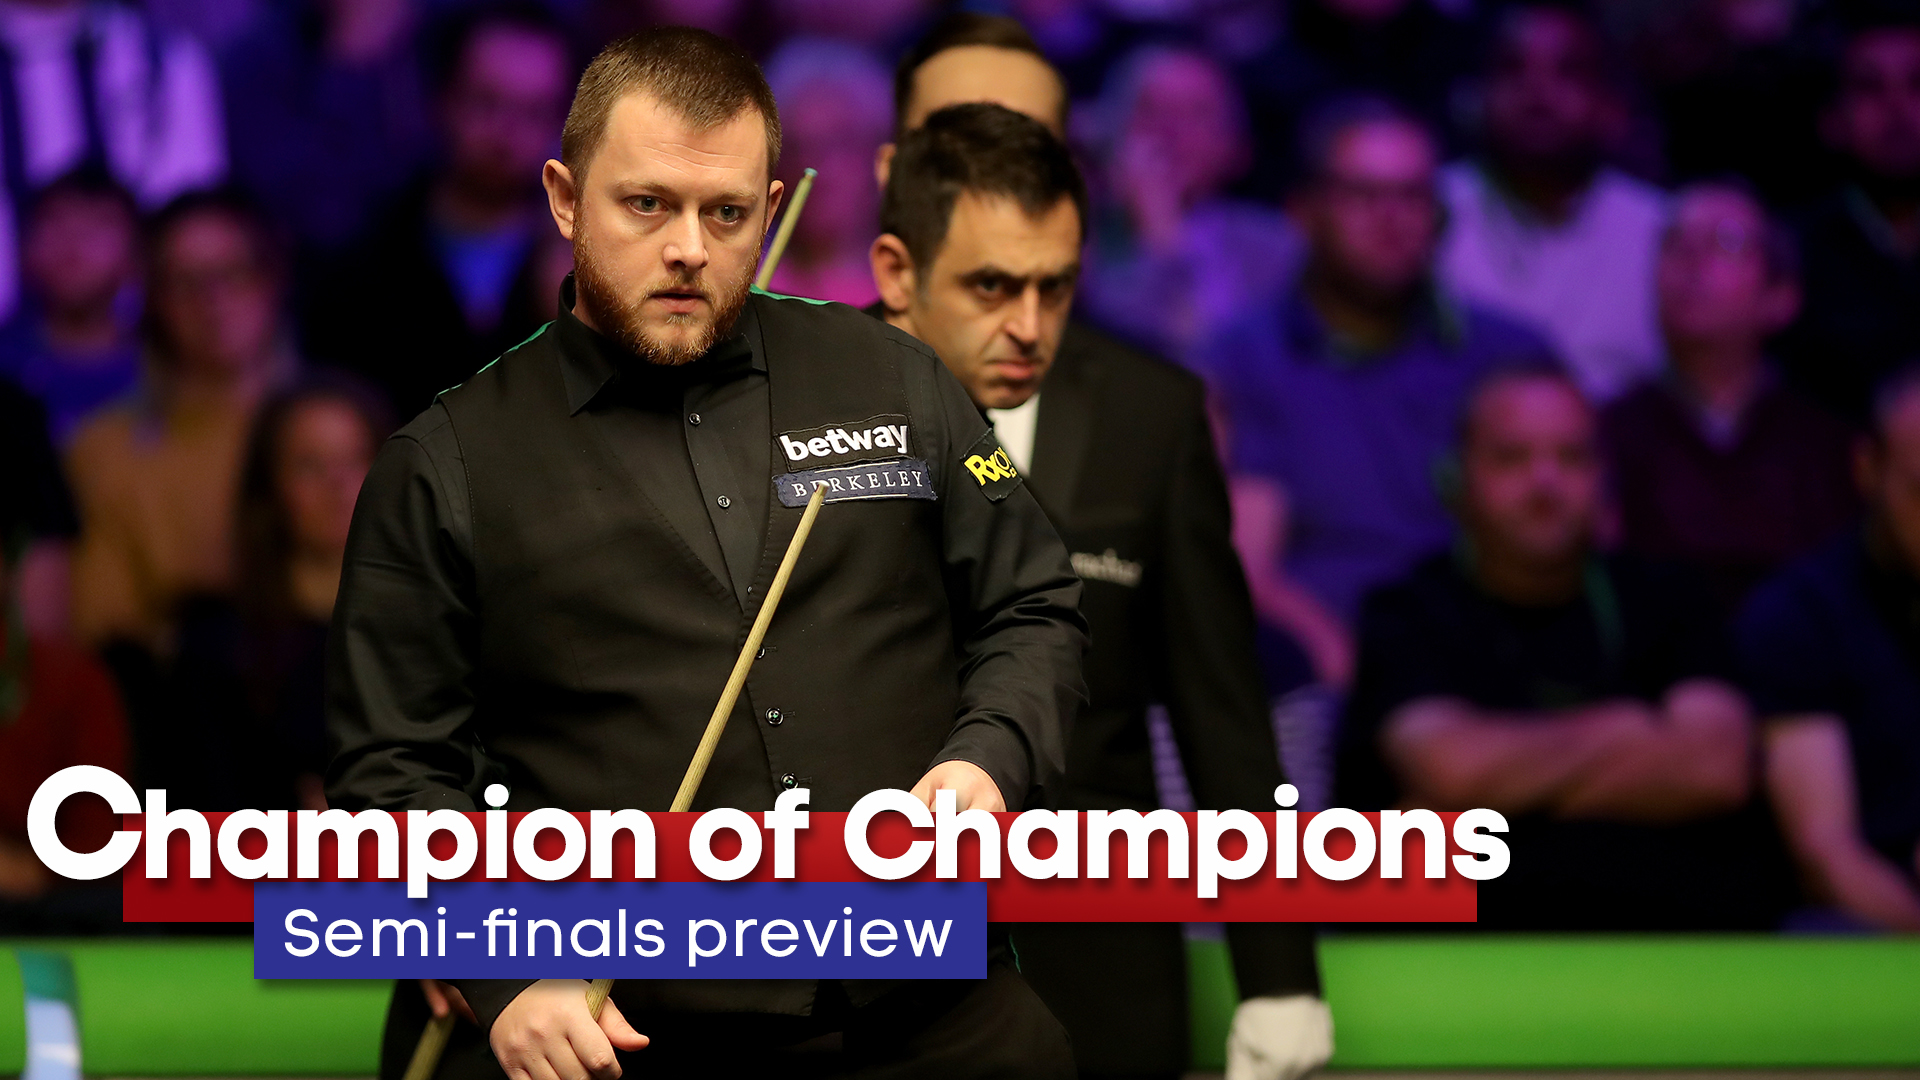 Champion of Champions free semi-finals betting preview and tips including Ronnie OSullivan